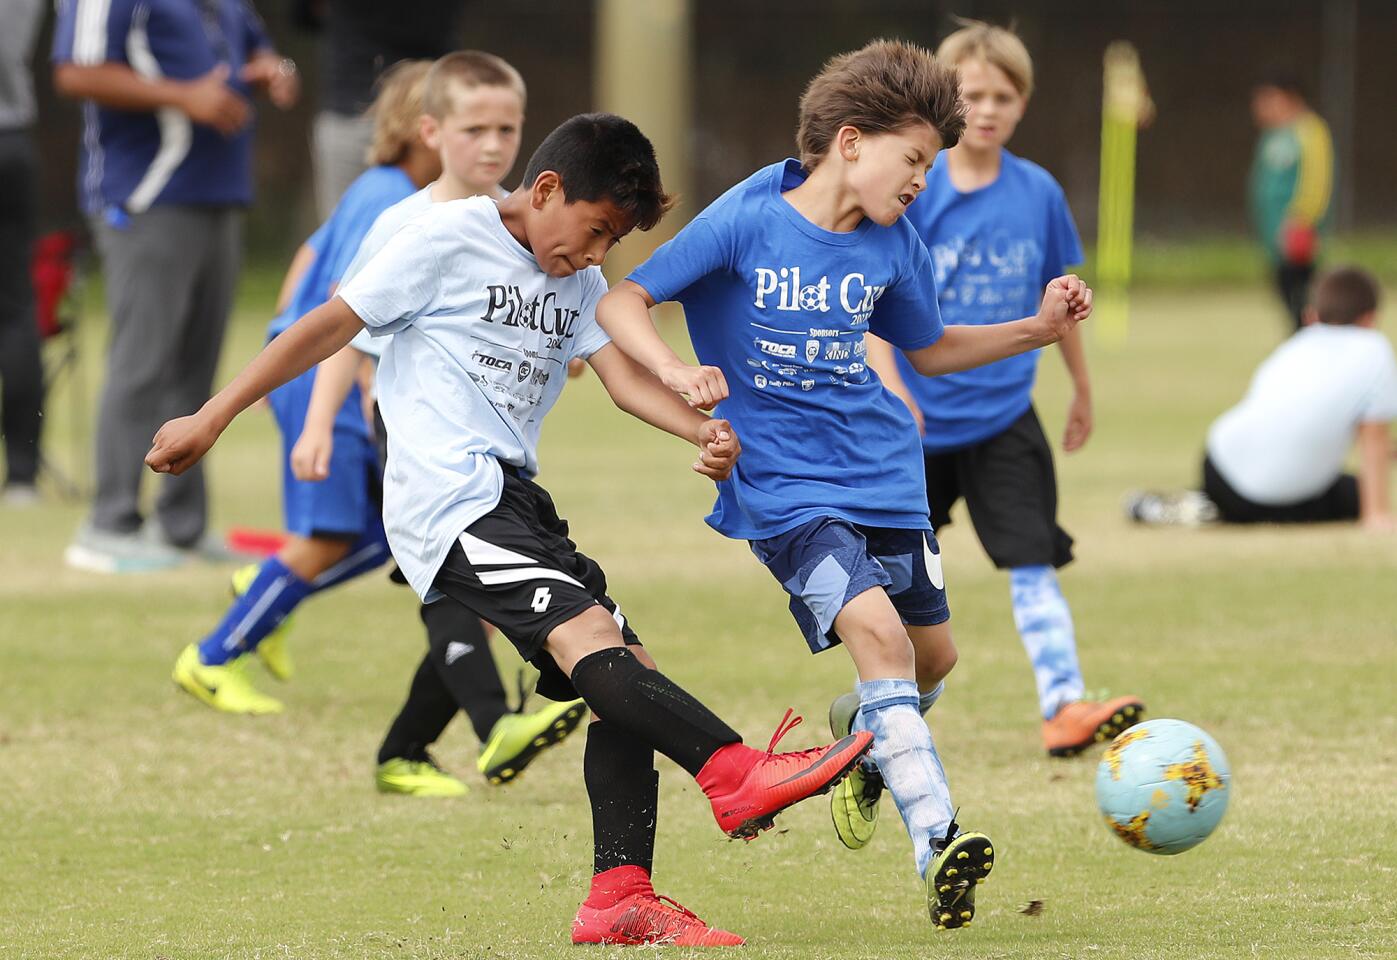 Paularino A's Edwin Salgado, left, and Lincoln B's Finn Mears battle for a ball during a boys' third- and fourth-grade Silver Division game at the Daily Pilot Cup on Wednesday, May 30.